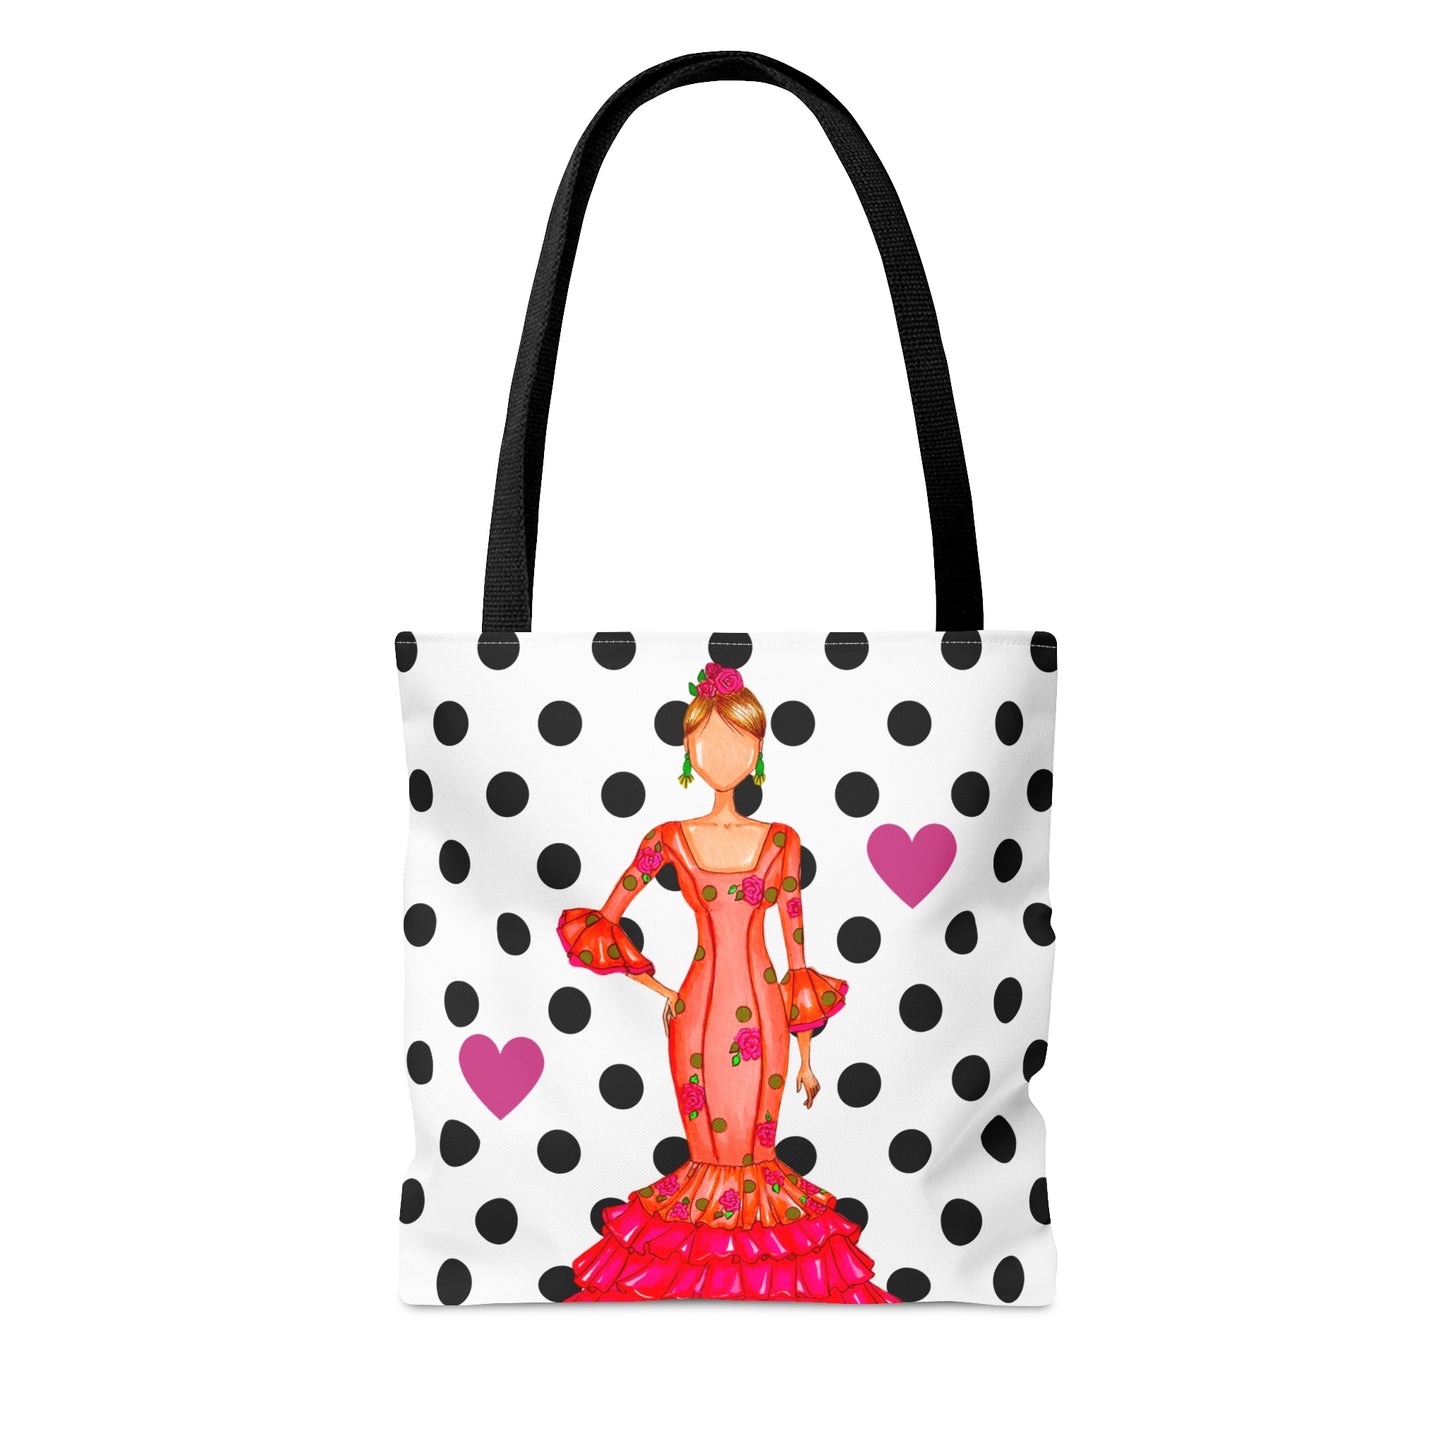 a tote bag with a woman in a polka dot dress